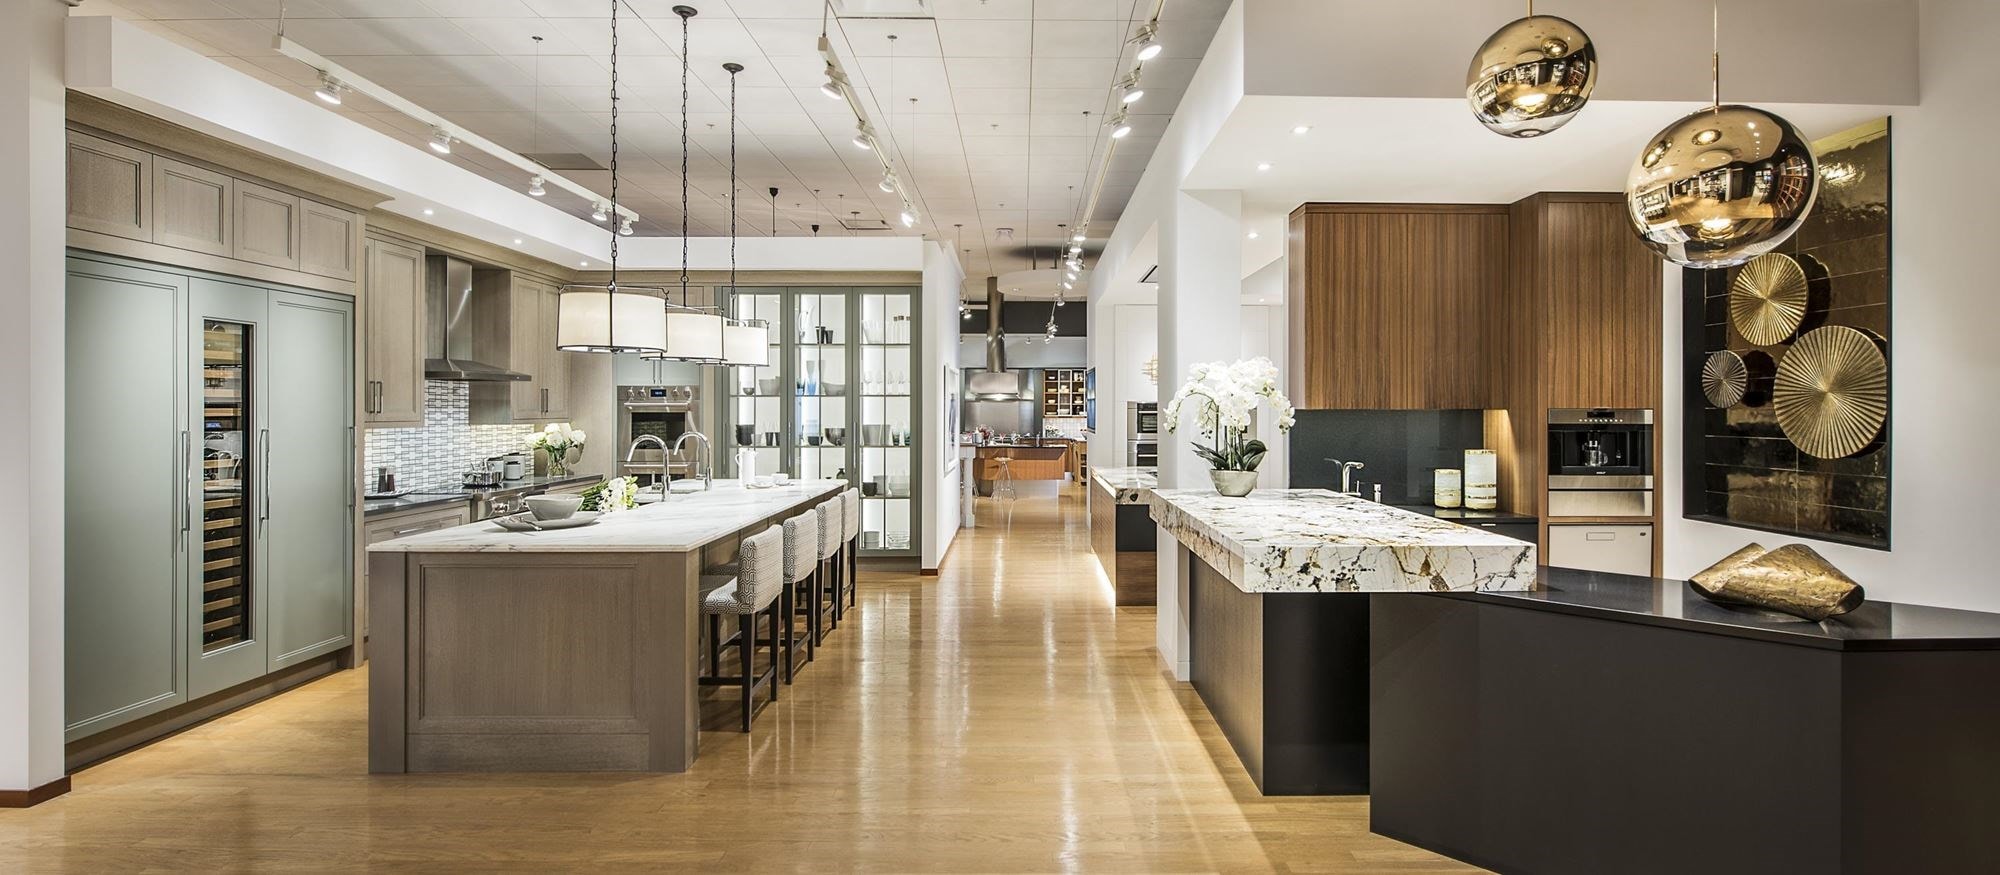 Explore ideas for your new kitchen at Sub-Zero, Wolf and Cove Showroom in Columbia, Maryland